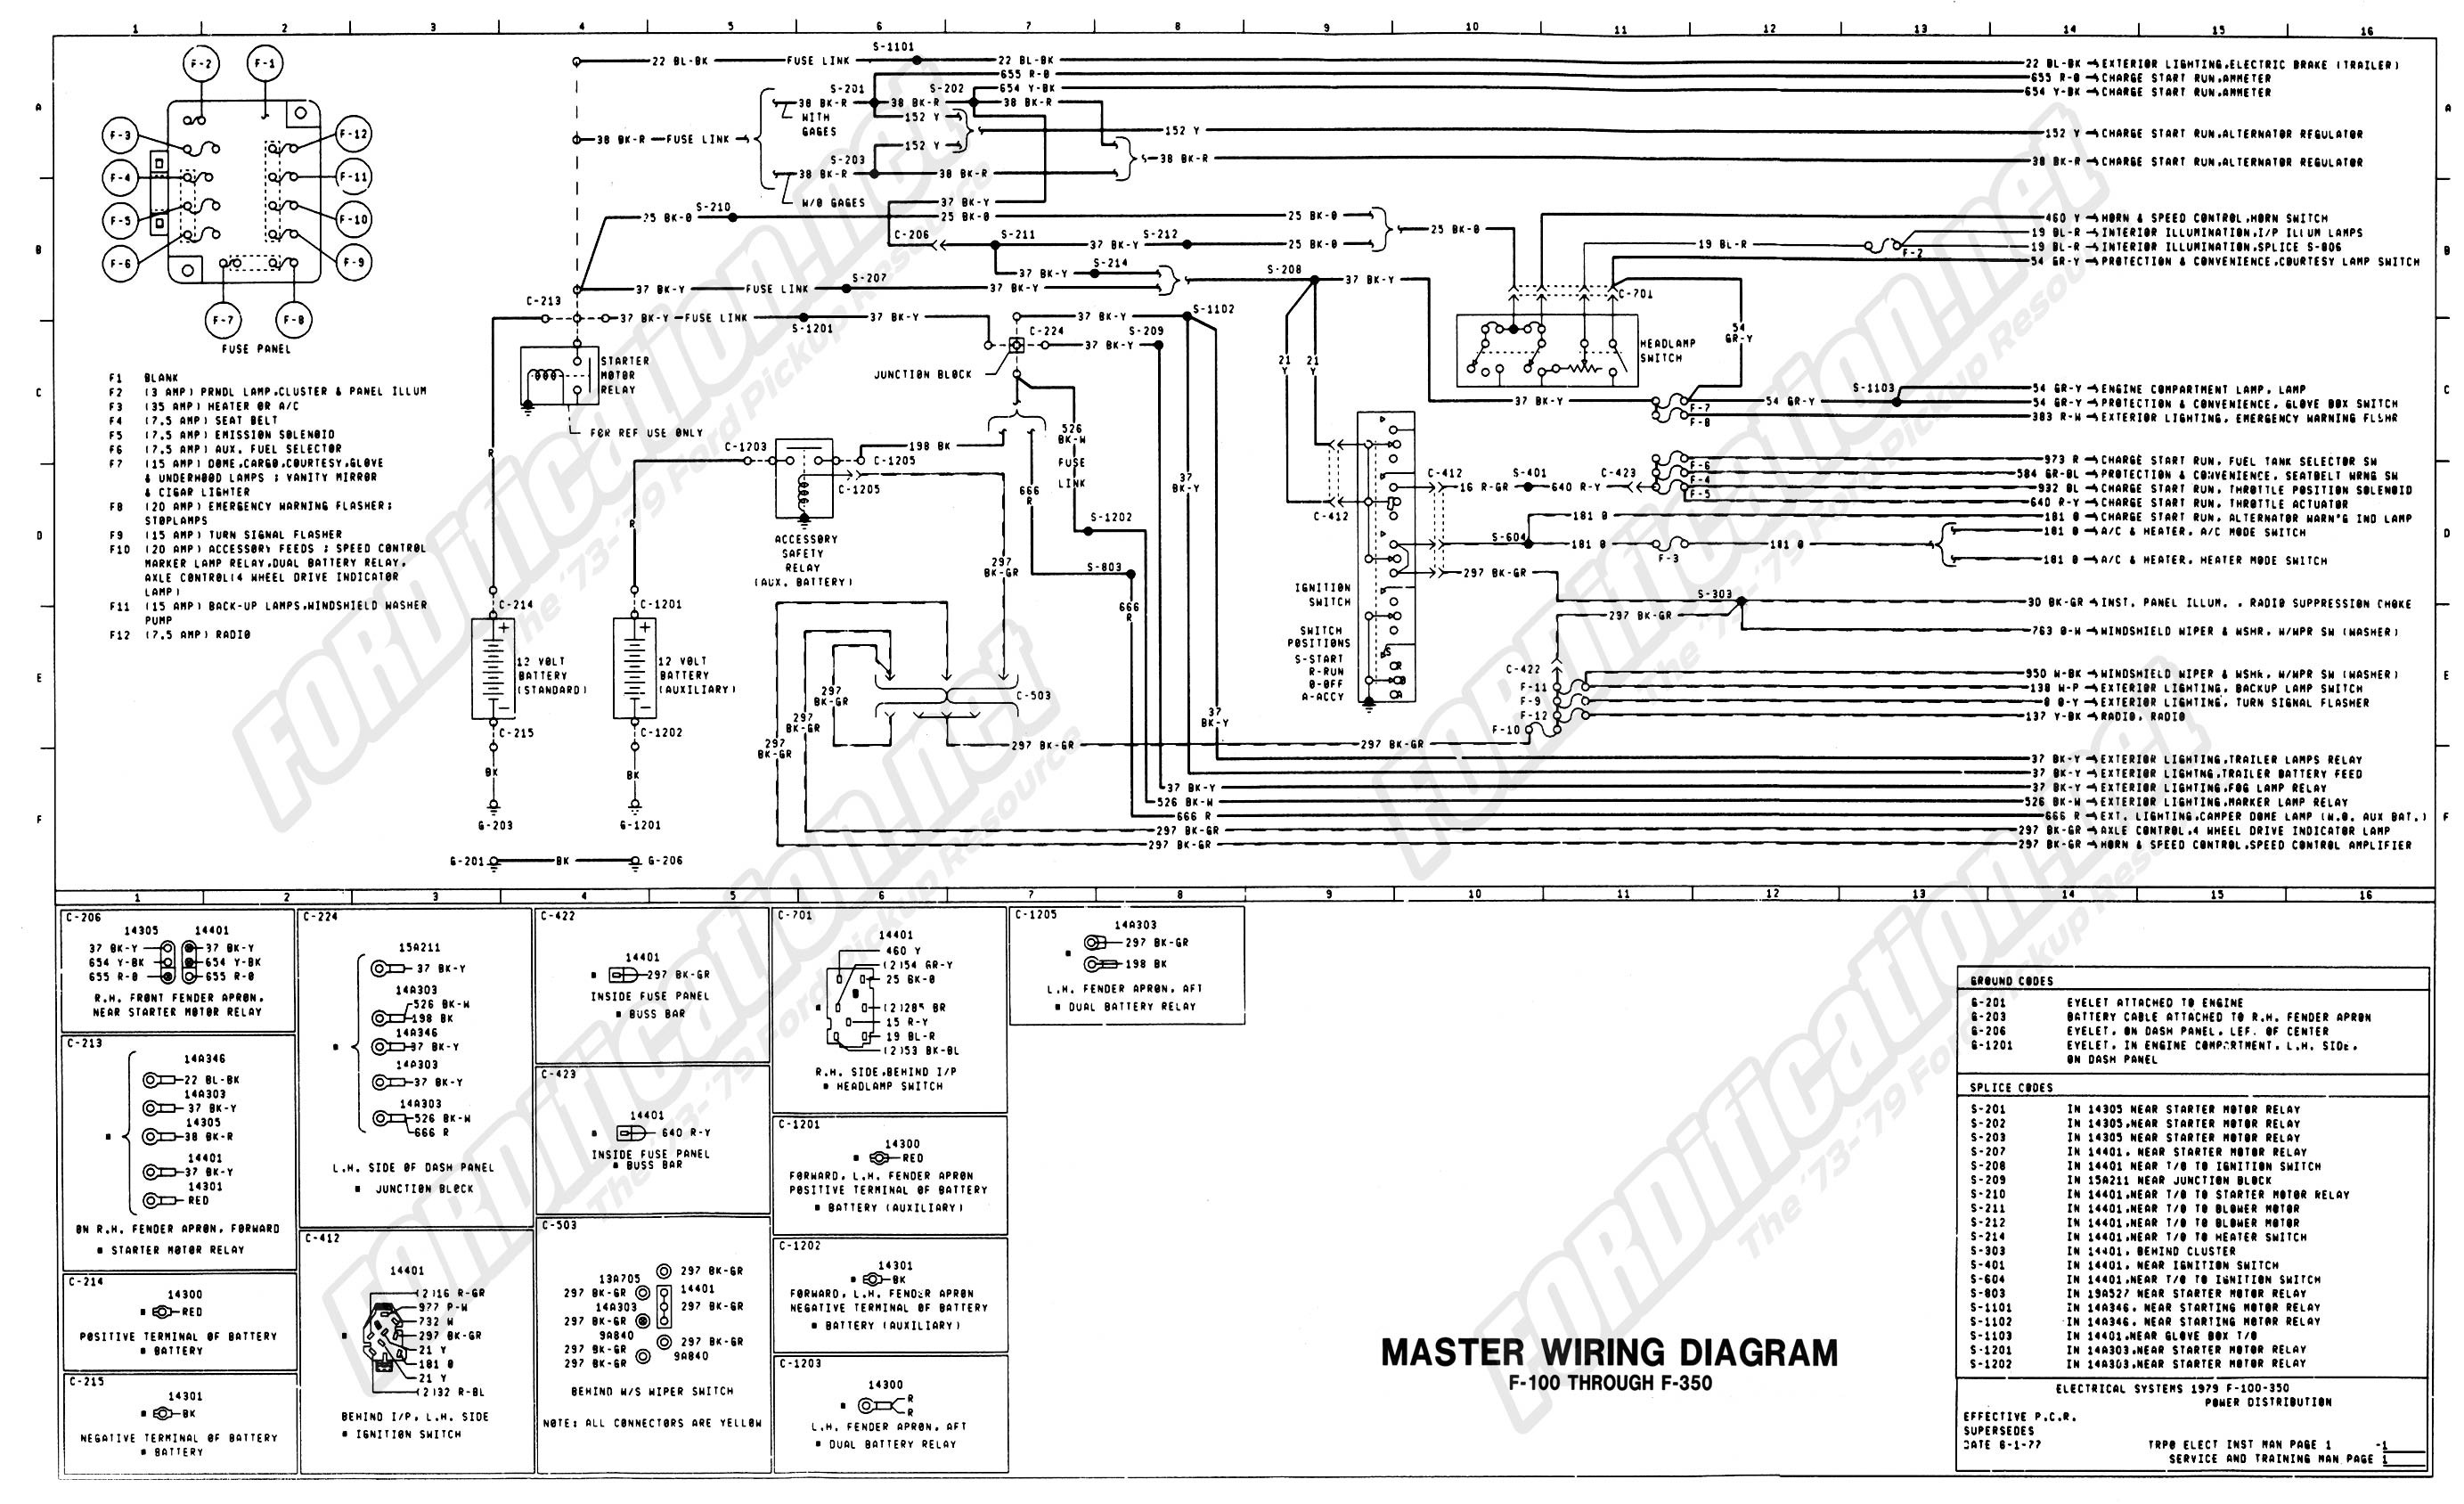 Universal Ignition Switch Wiring Diagram Wiring Diagram 1979 ford F150 Ignition Switch and ford Ignition Of Universal Ignition Switch Wiring Diagram